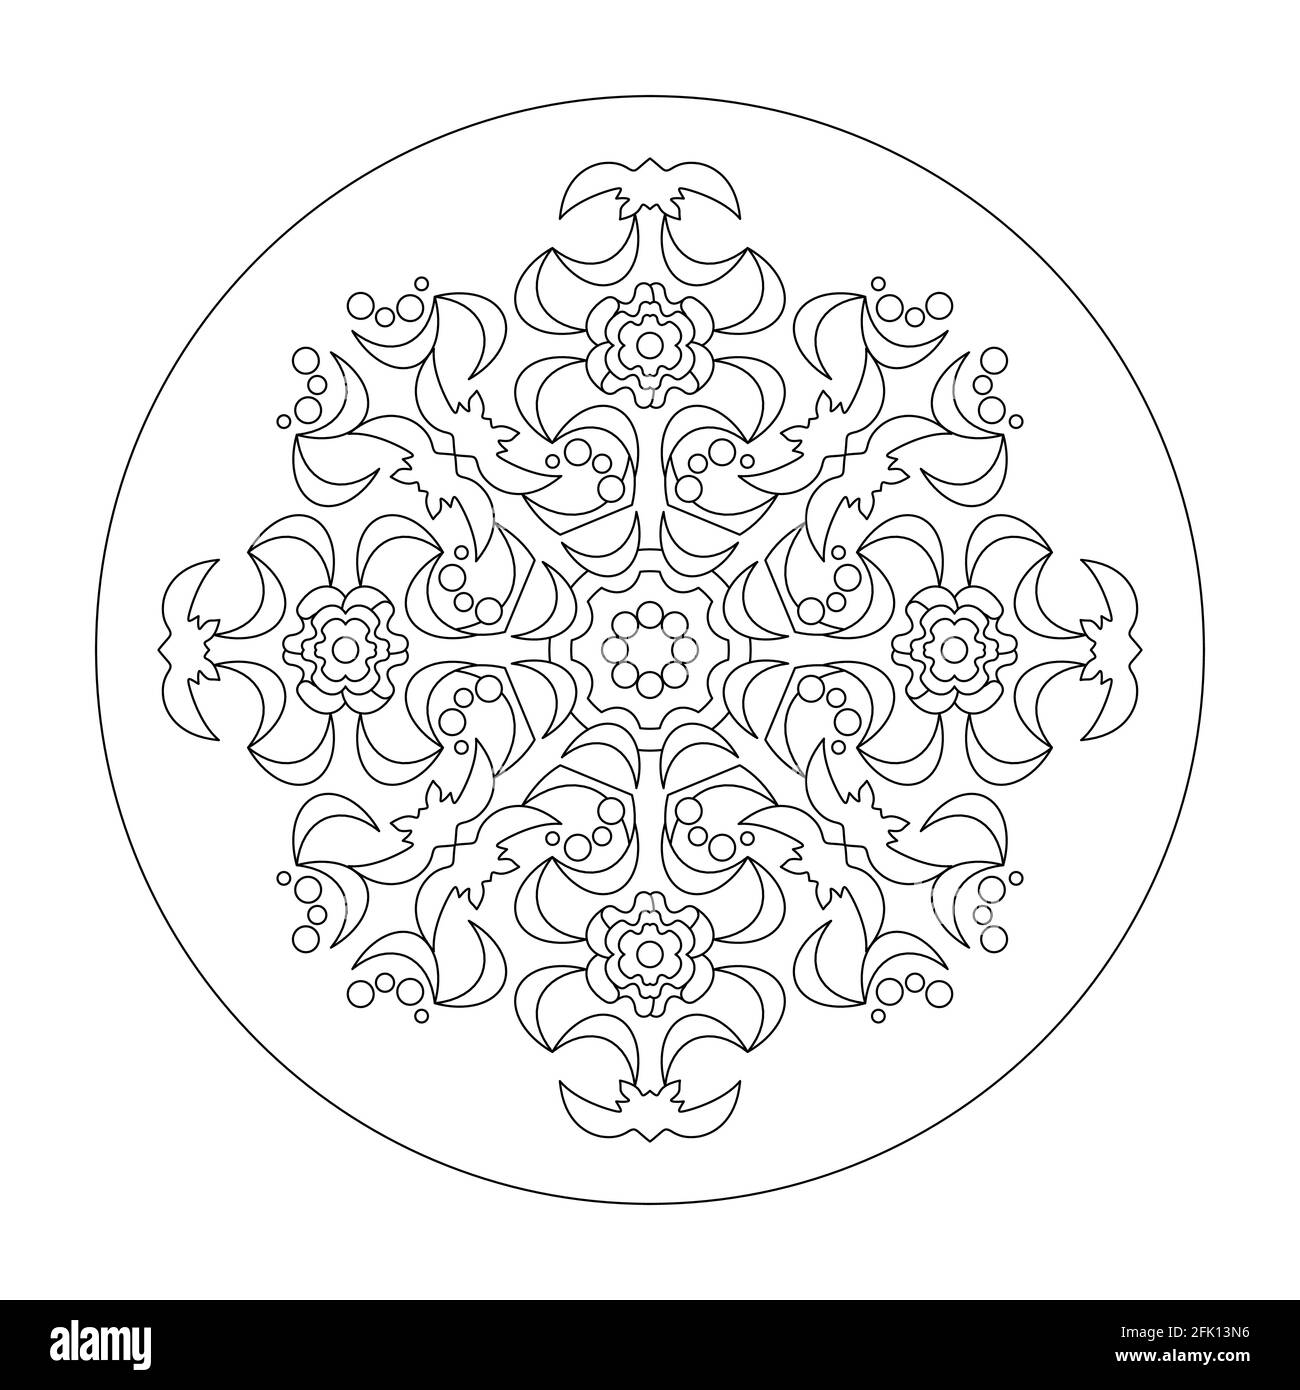 Mandala coloring page. Abstract. Art Therapy. Anti-stress. Vector illustration black and white. Stock Vector